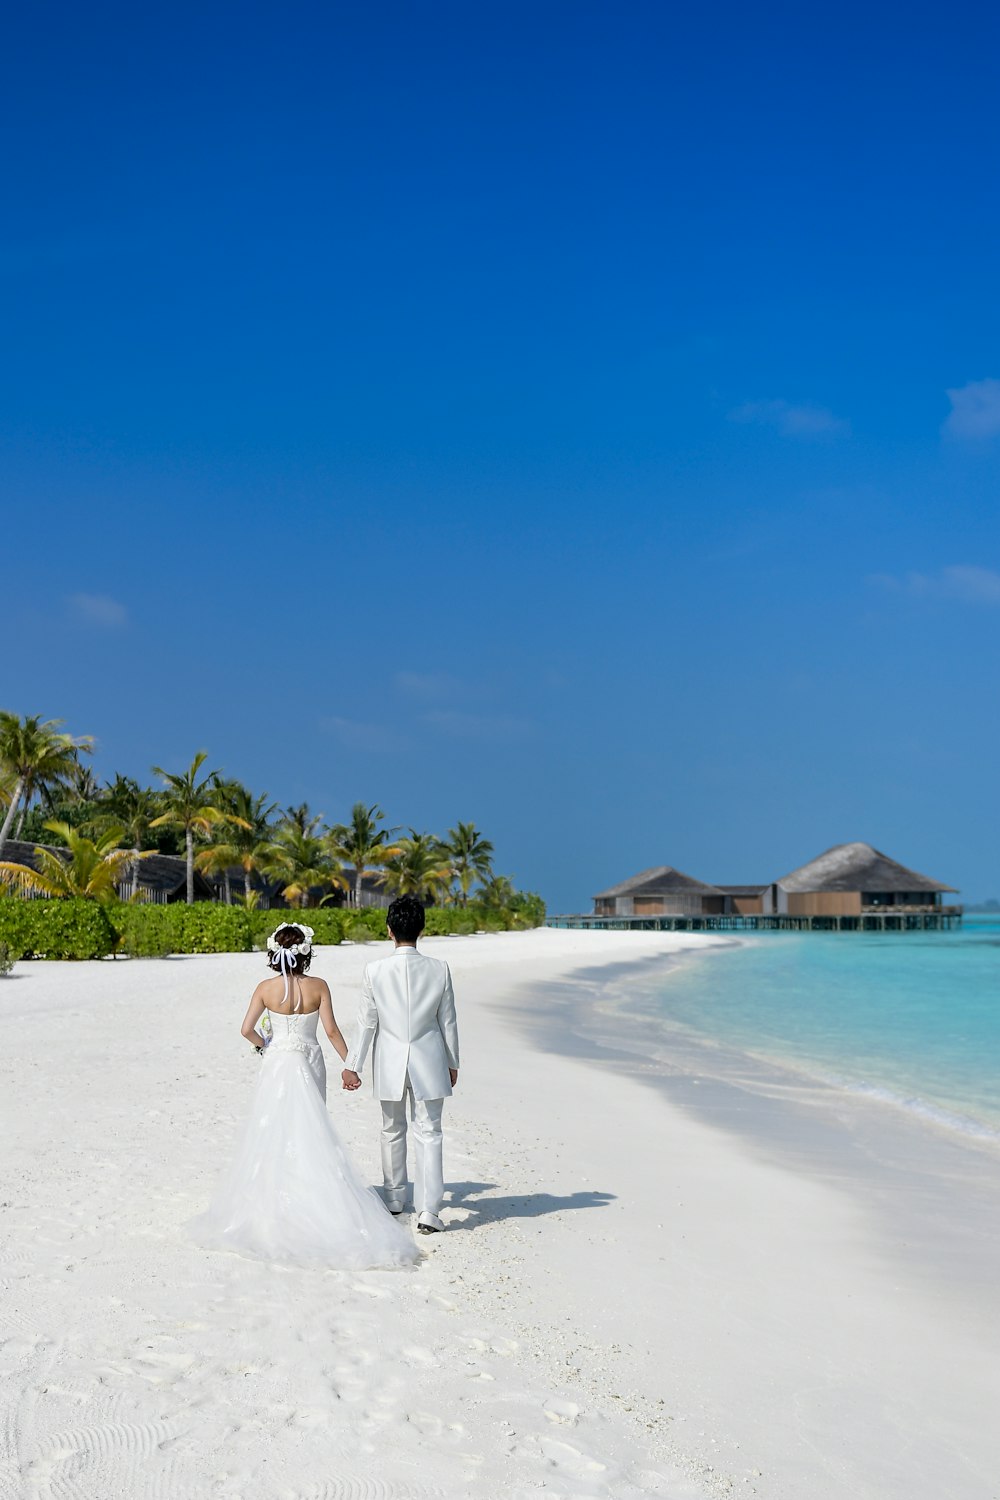 A newly married couple walks along a pristine beach in the Maldives